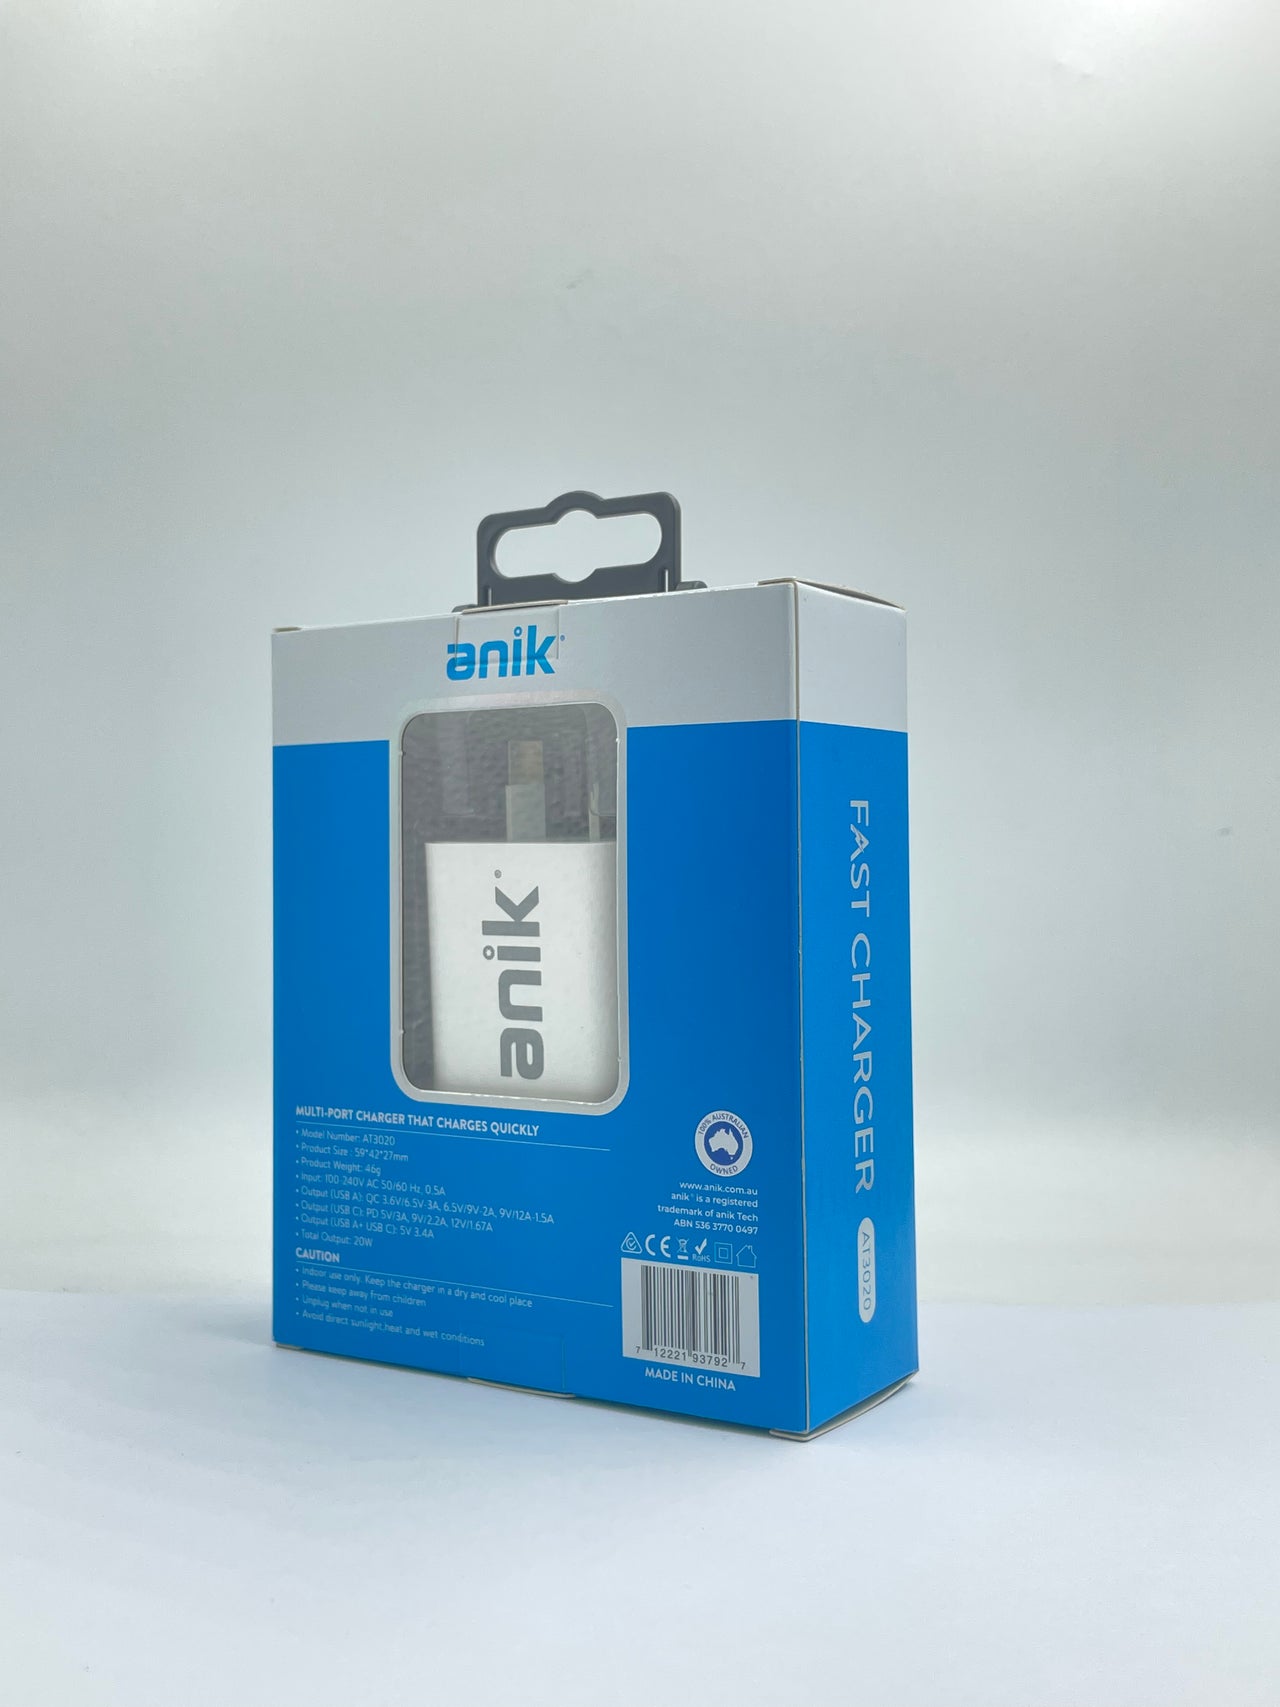 Anik 20W PD USB C Wall Charger Dual Port Fast Quick QC 3.0 Power Adapter